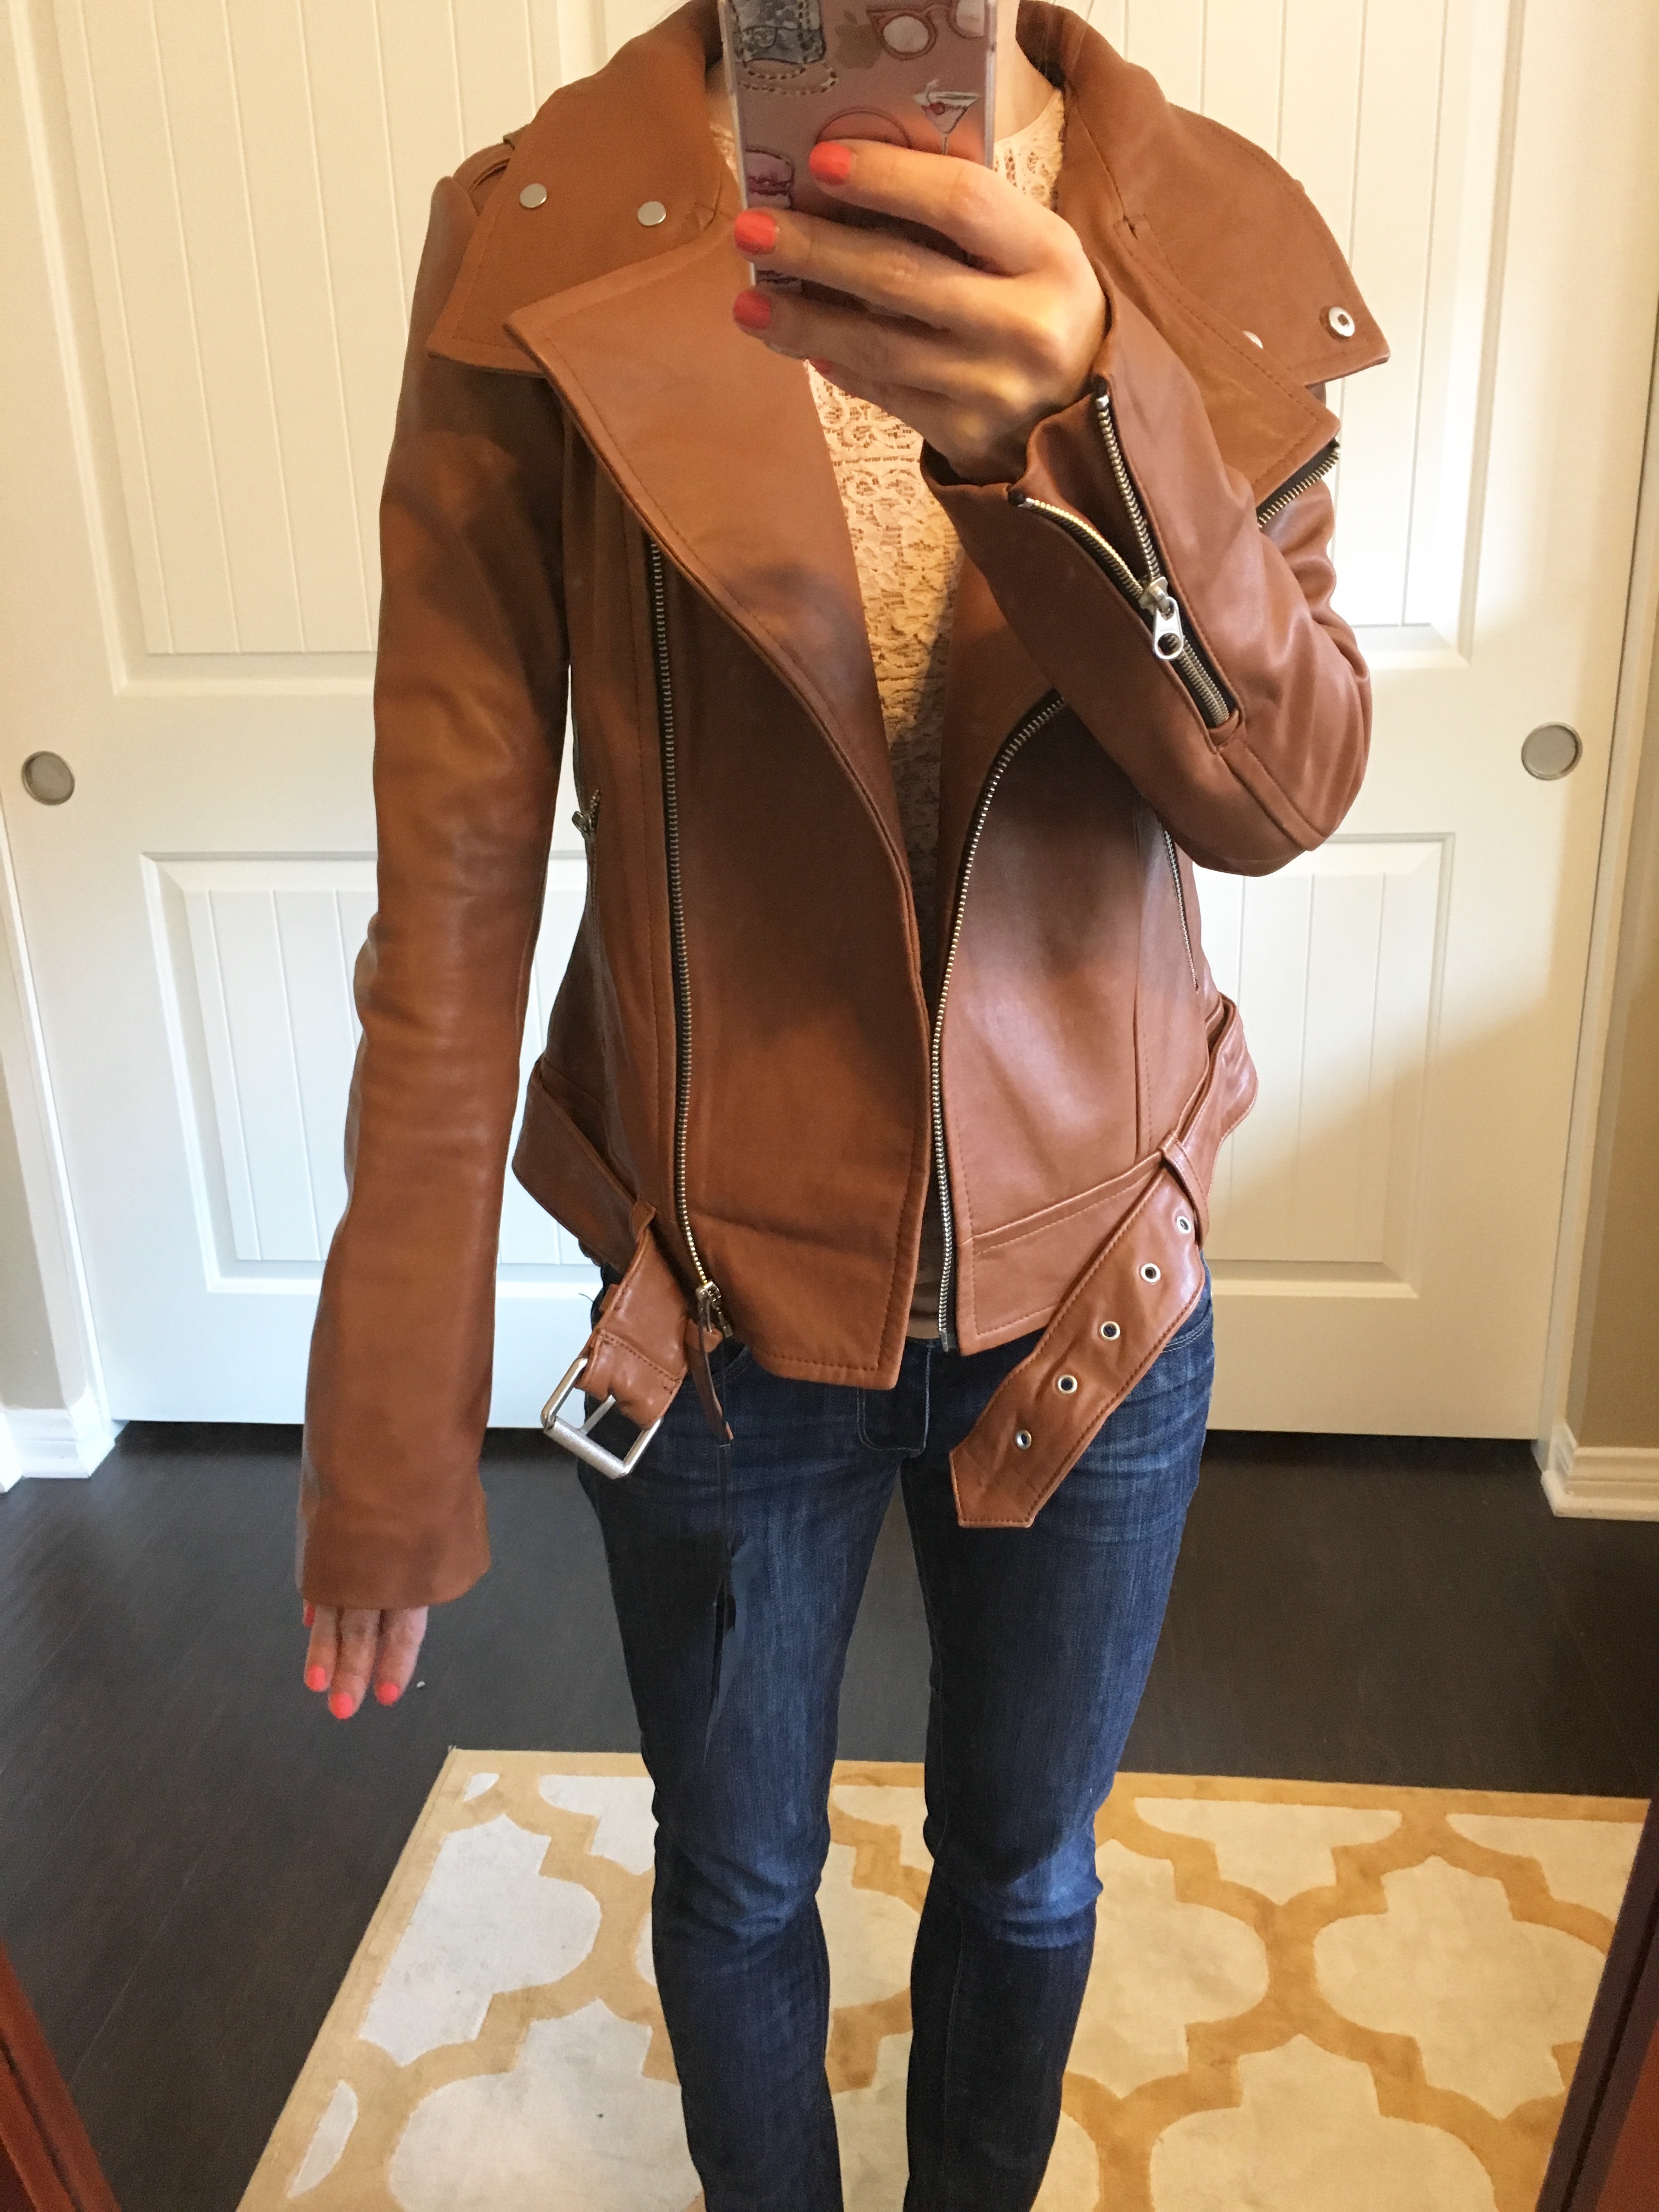 J. Crew Denim Jacket Review | Mackage Hania Moto Leather Jacket cognac and pink | Theory Gida Mini Skirt | Nordstrom Trouve Pleated Blazer | Banana Republic Scallop Blazer | Gibson Twist Front Cozy Fleece Pullover | Caslon Fringed Tee | Petite fashion and style